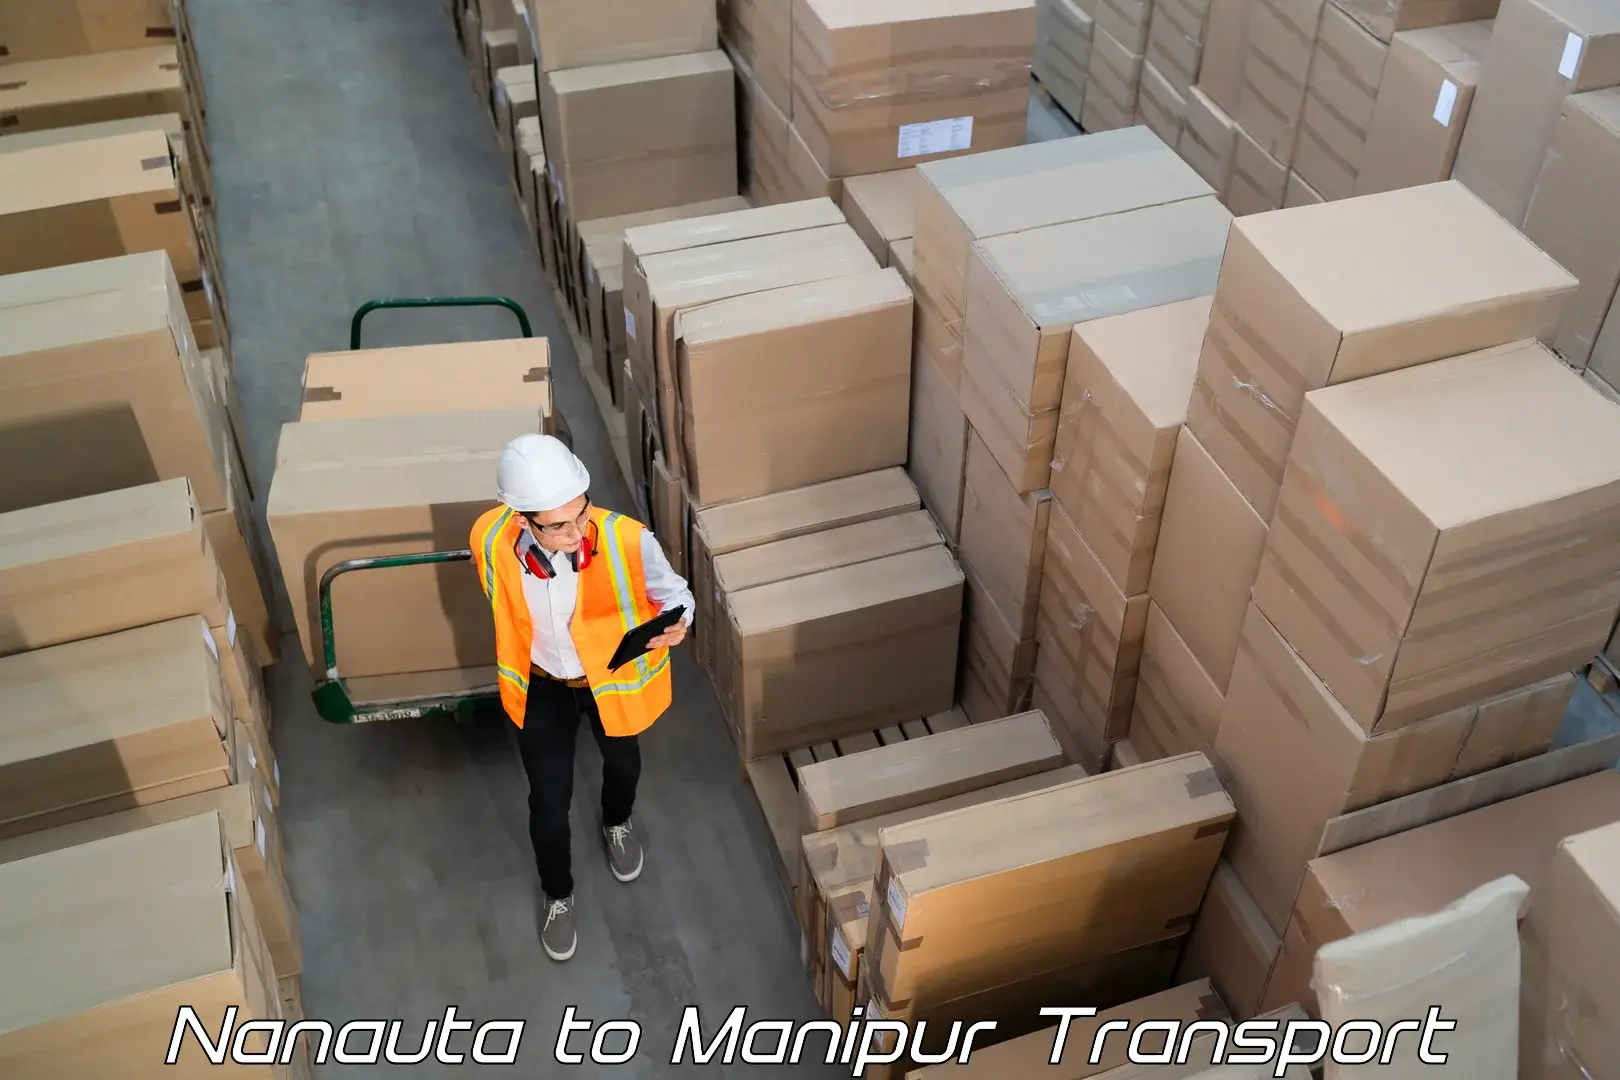 Scooty transport charges Nanauta to Manipur